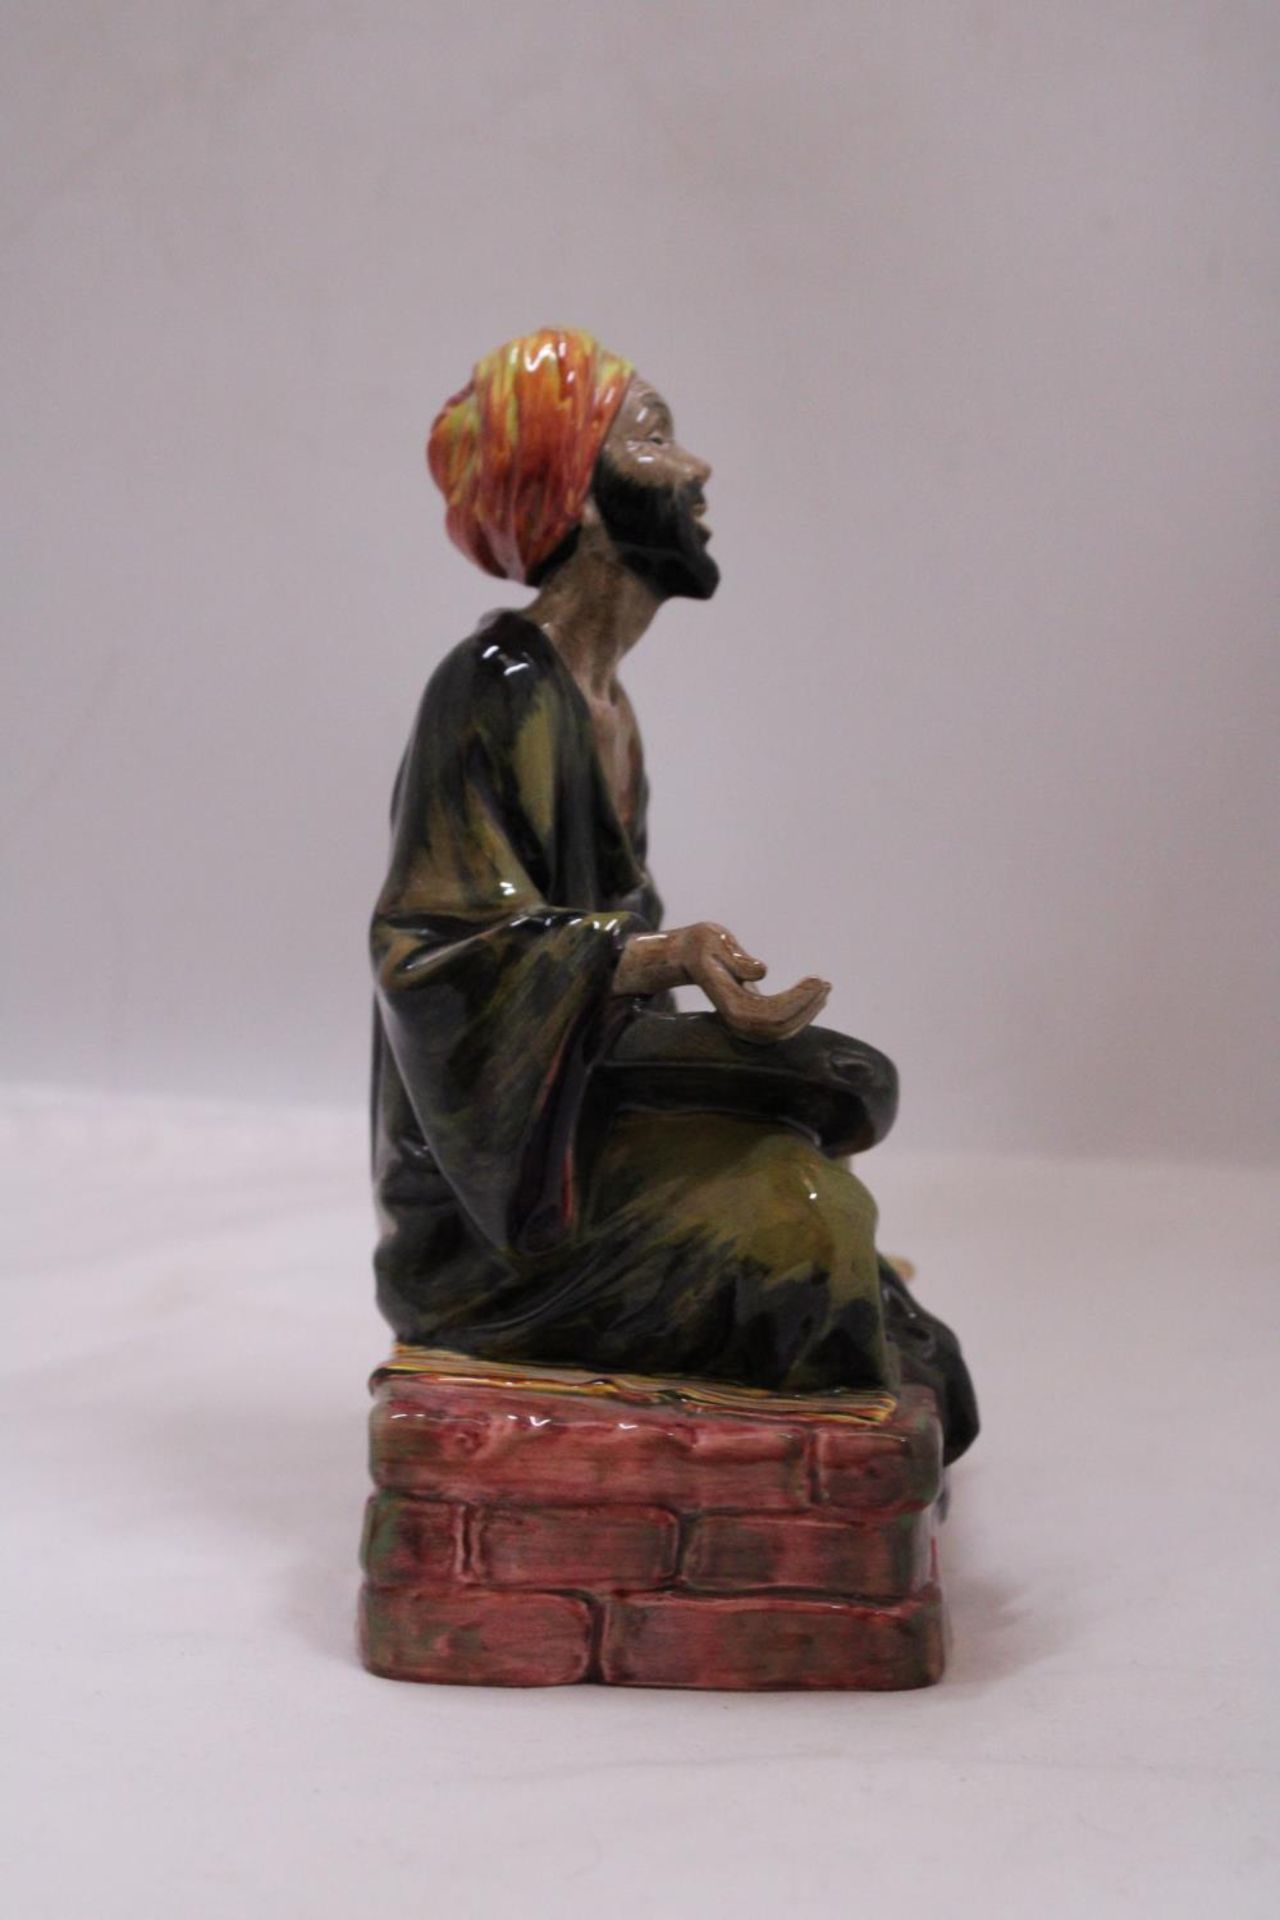 ROYAL DOULTON "MEDICANT" FIGURINE HN1365S - Image 3 of 4